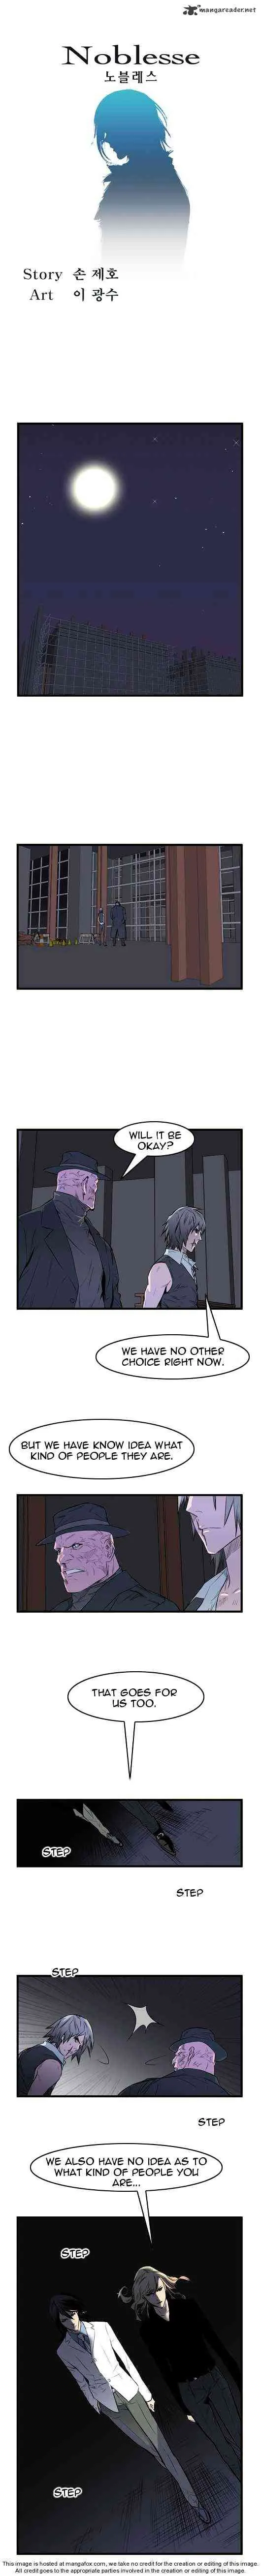 Noblesse Chapter 46 _ Chapters 46-60 page 52